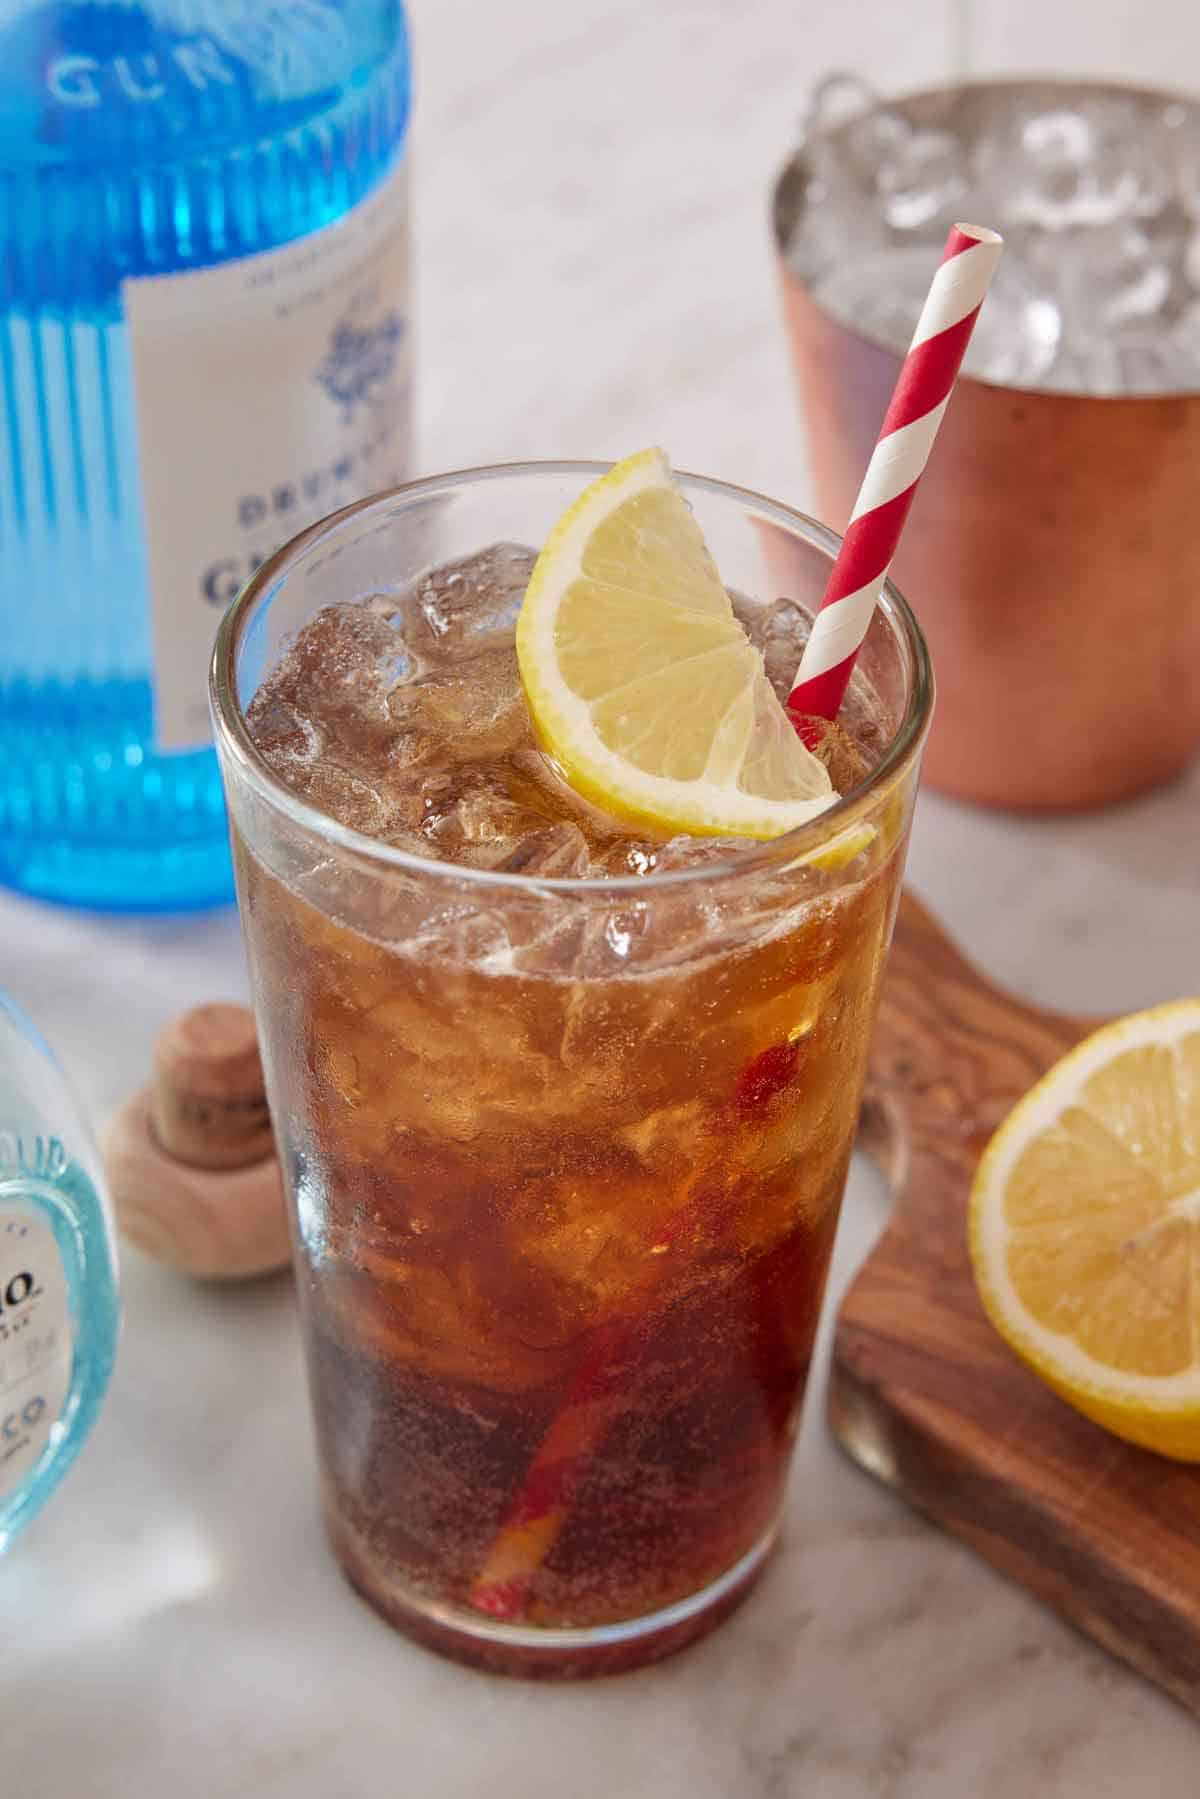 A glass of Long Island Iced Tea with a slice of lemon and a striped straw.